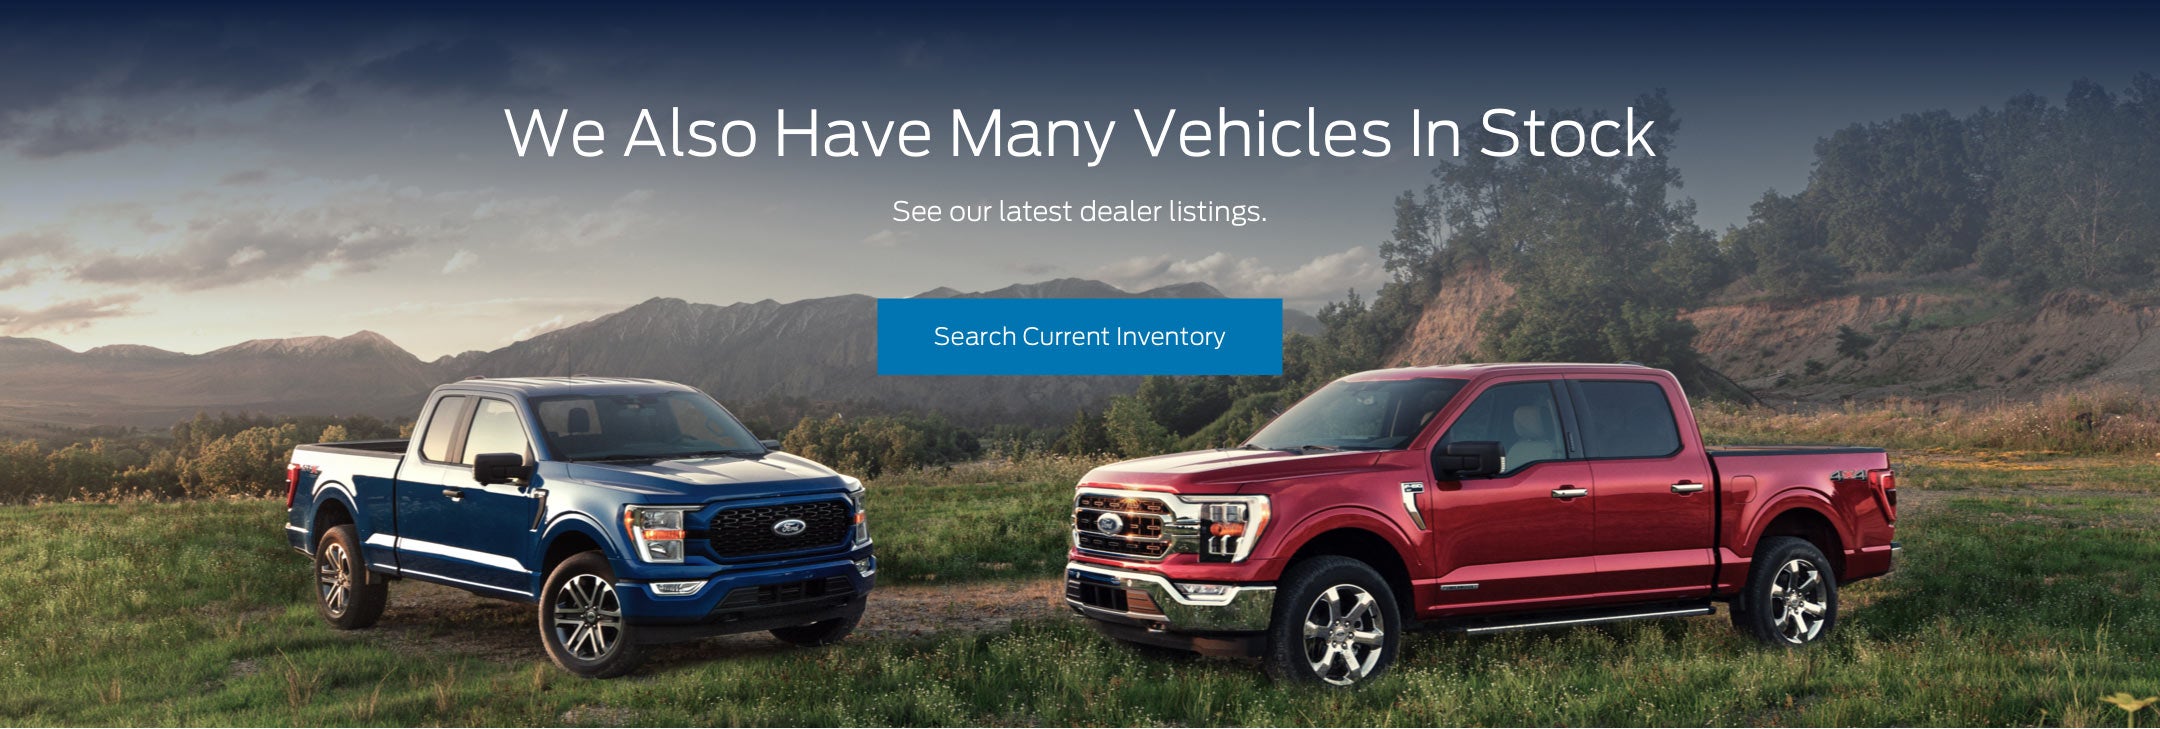 Ford vehicles in stock | Mike Reichenbach Ford in Florence SC